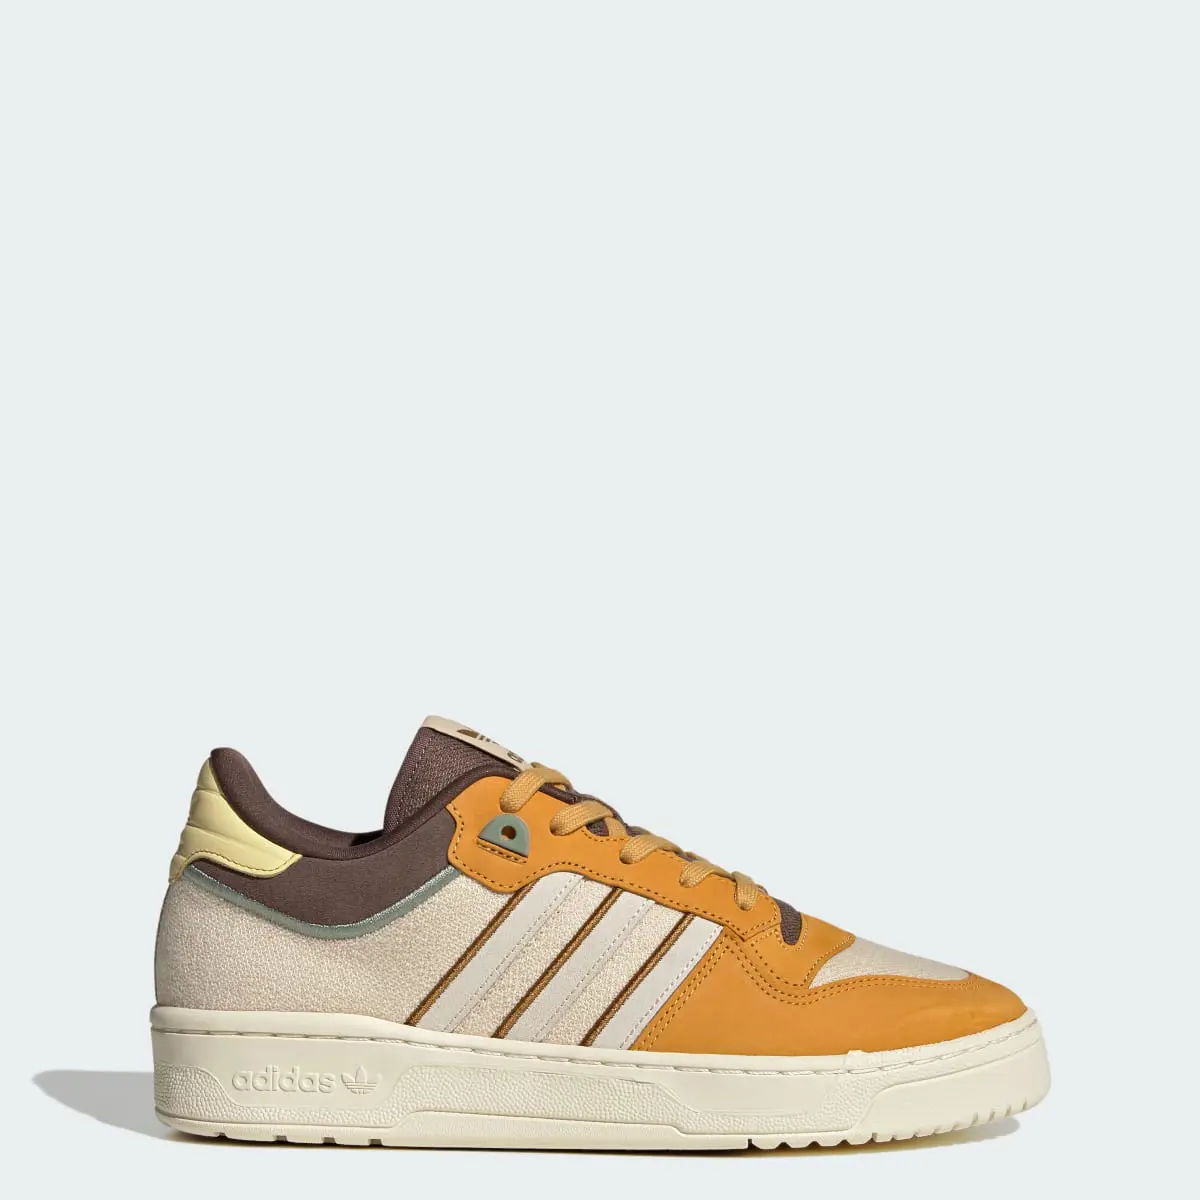 Adidas Rivalry Low 86 Basketball Shoes. 1